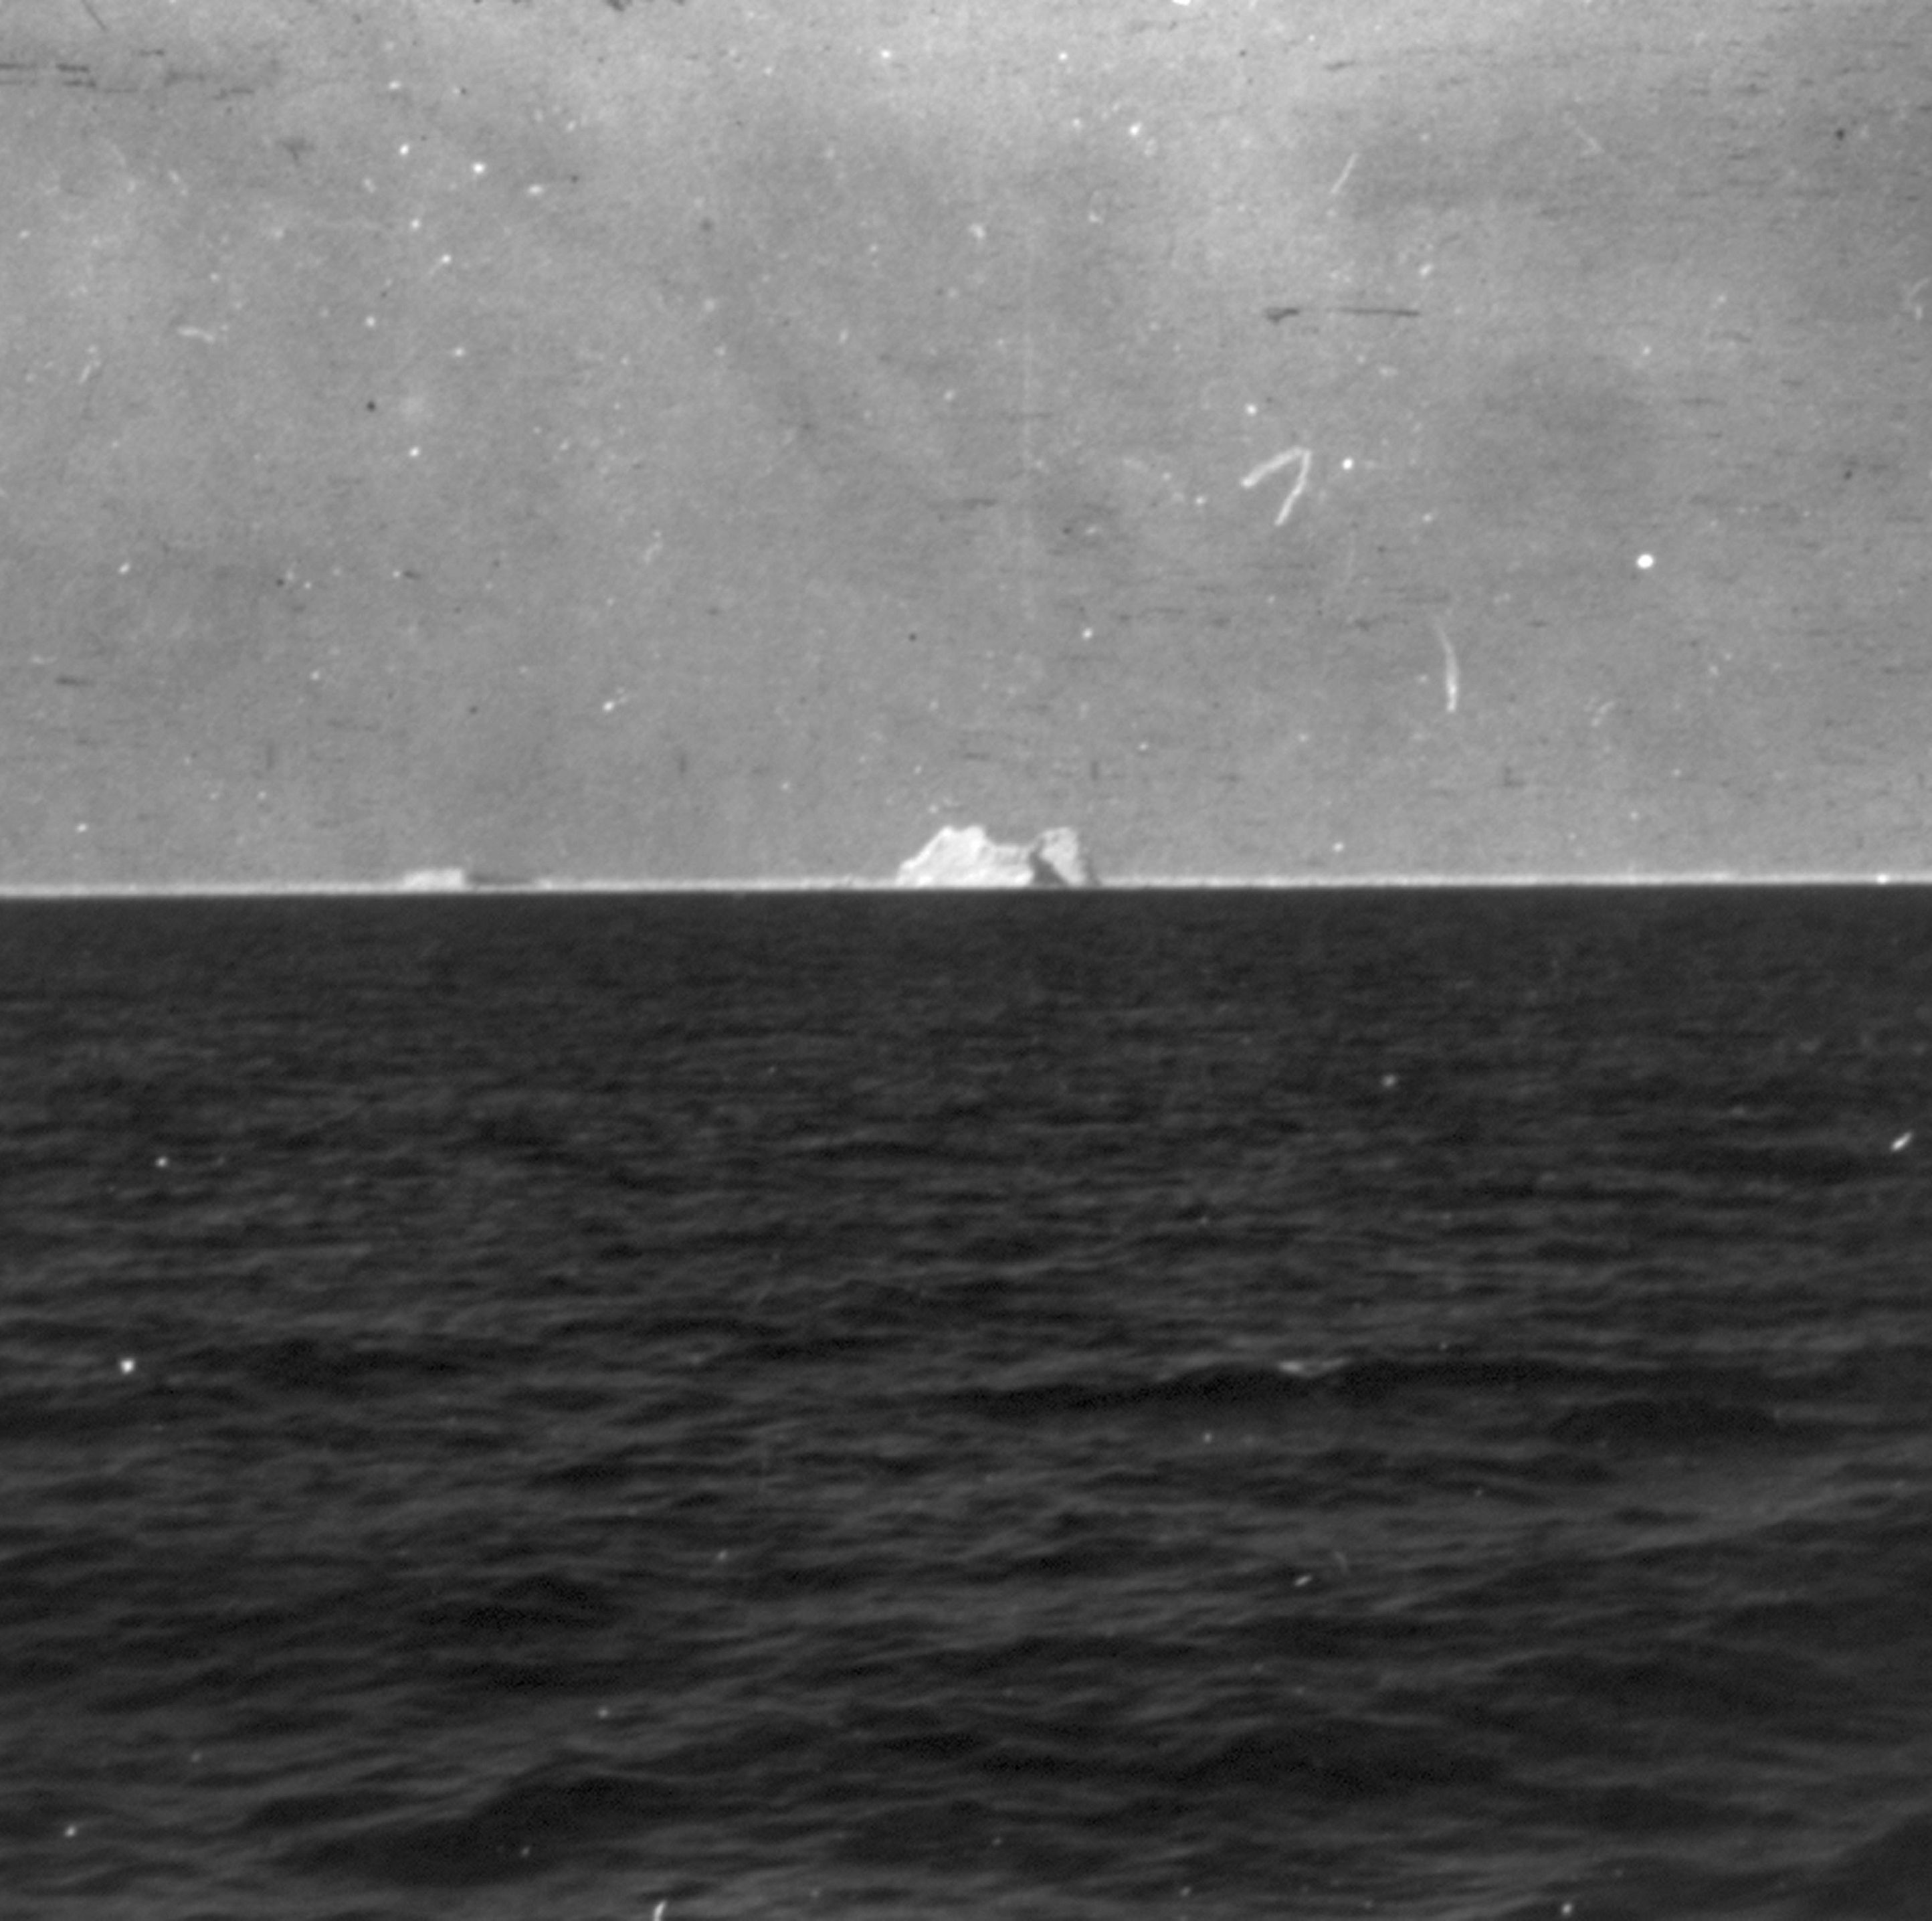 A Stunning New Photo May Finally Show the Iceberg That Sank the Titanic